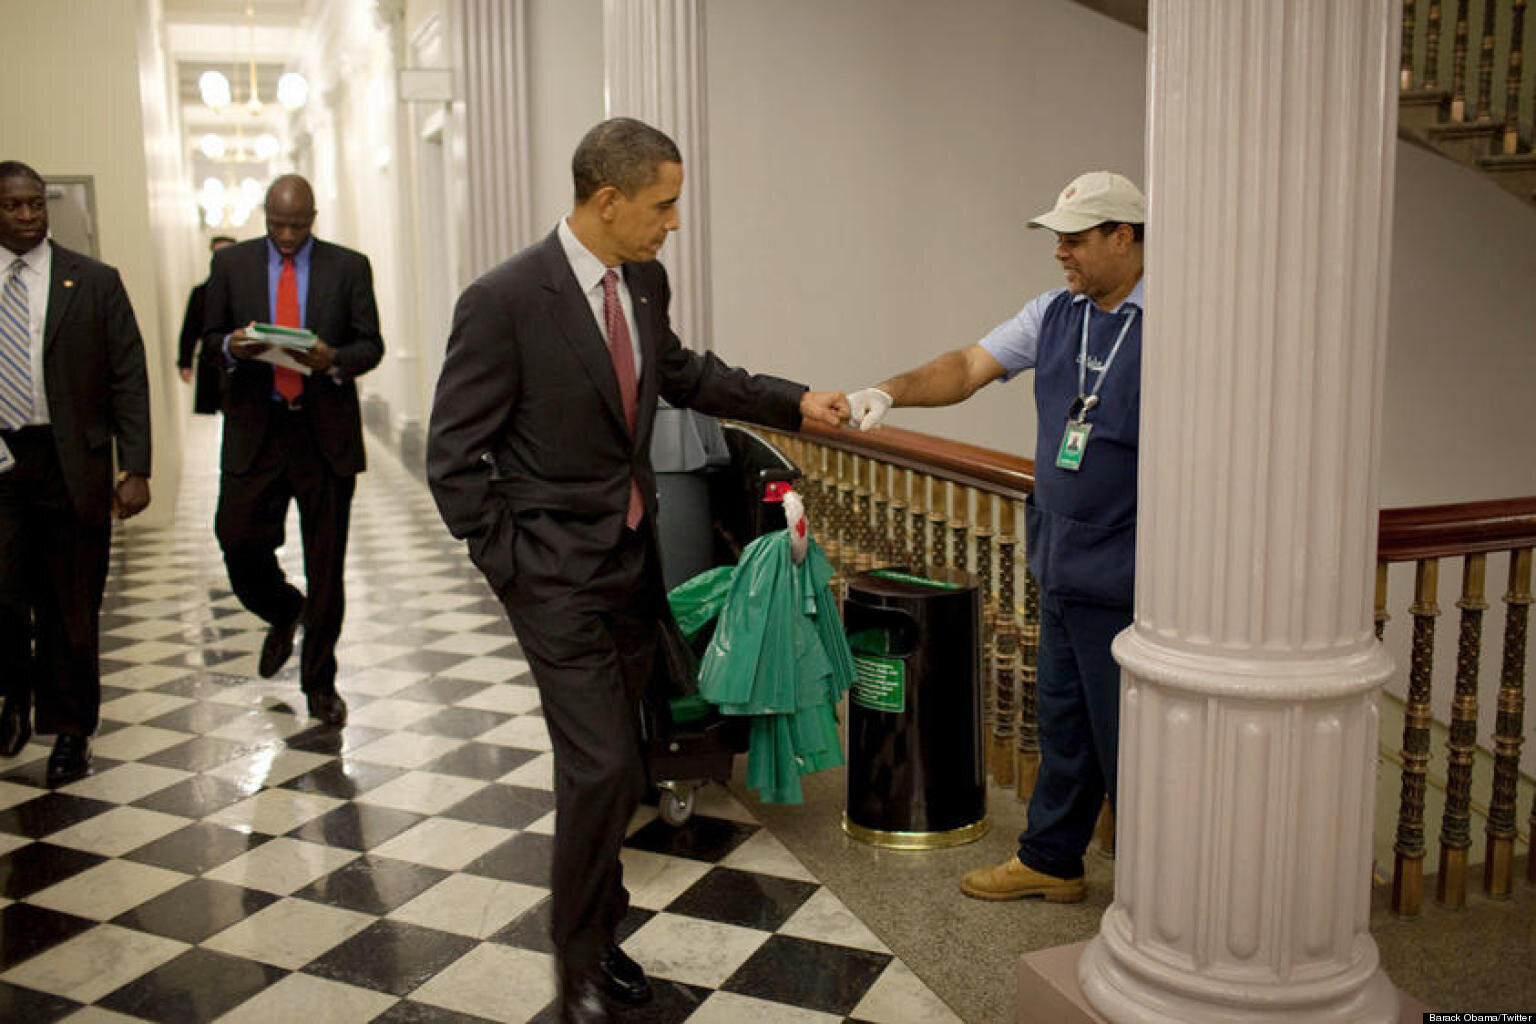 Barack Obama Fist-Bumps White House Cleaner, 36 Days To Win This (PICTURE) HuffPost UK Politics